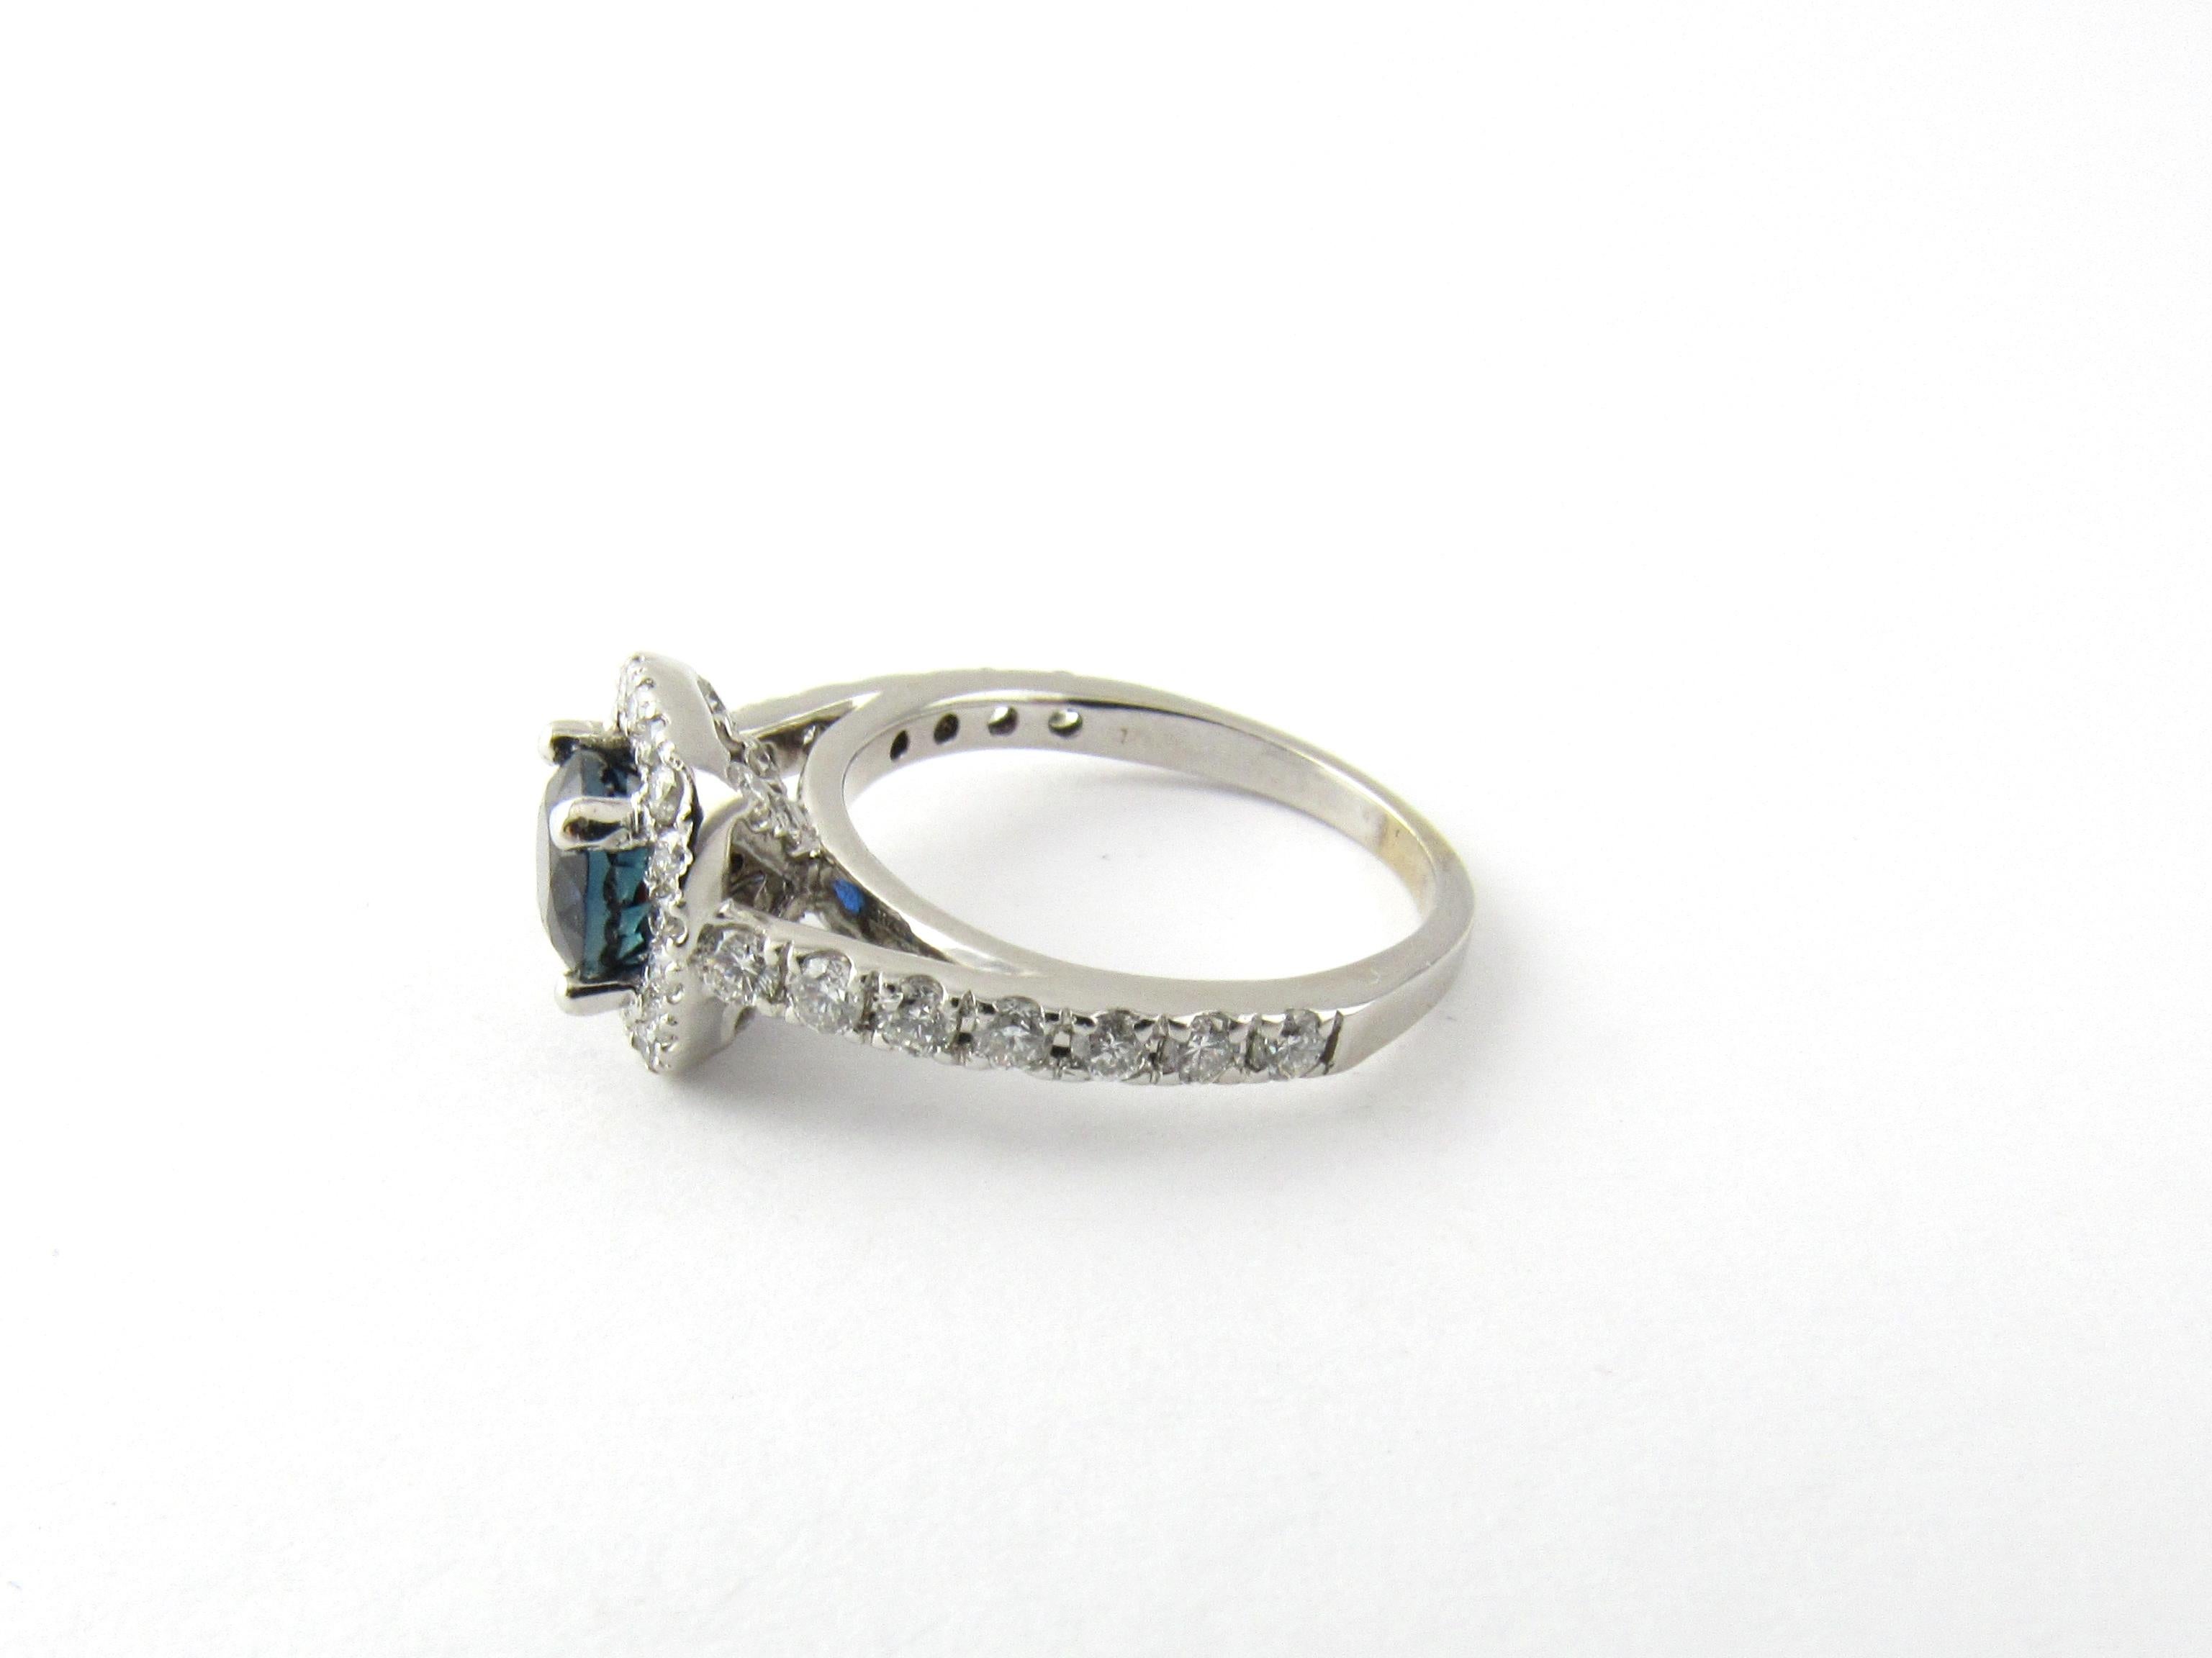 Vintage 14 Karat White Gold Natural Sapphire and Diamond Ring Size 4.75- 
This stunning ring features one round sapphire (6 mm) surrounded by 25 round brilliant cut diamonds set in beautifully detailed 14K white gold. Shank measures 2 mm.